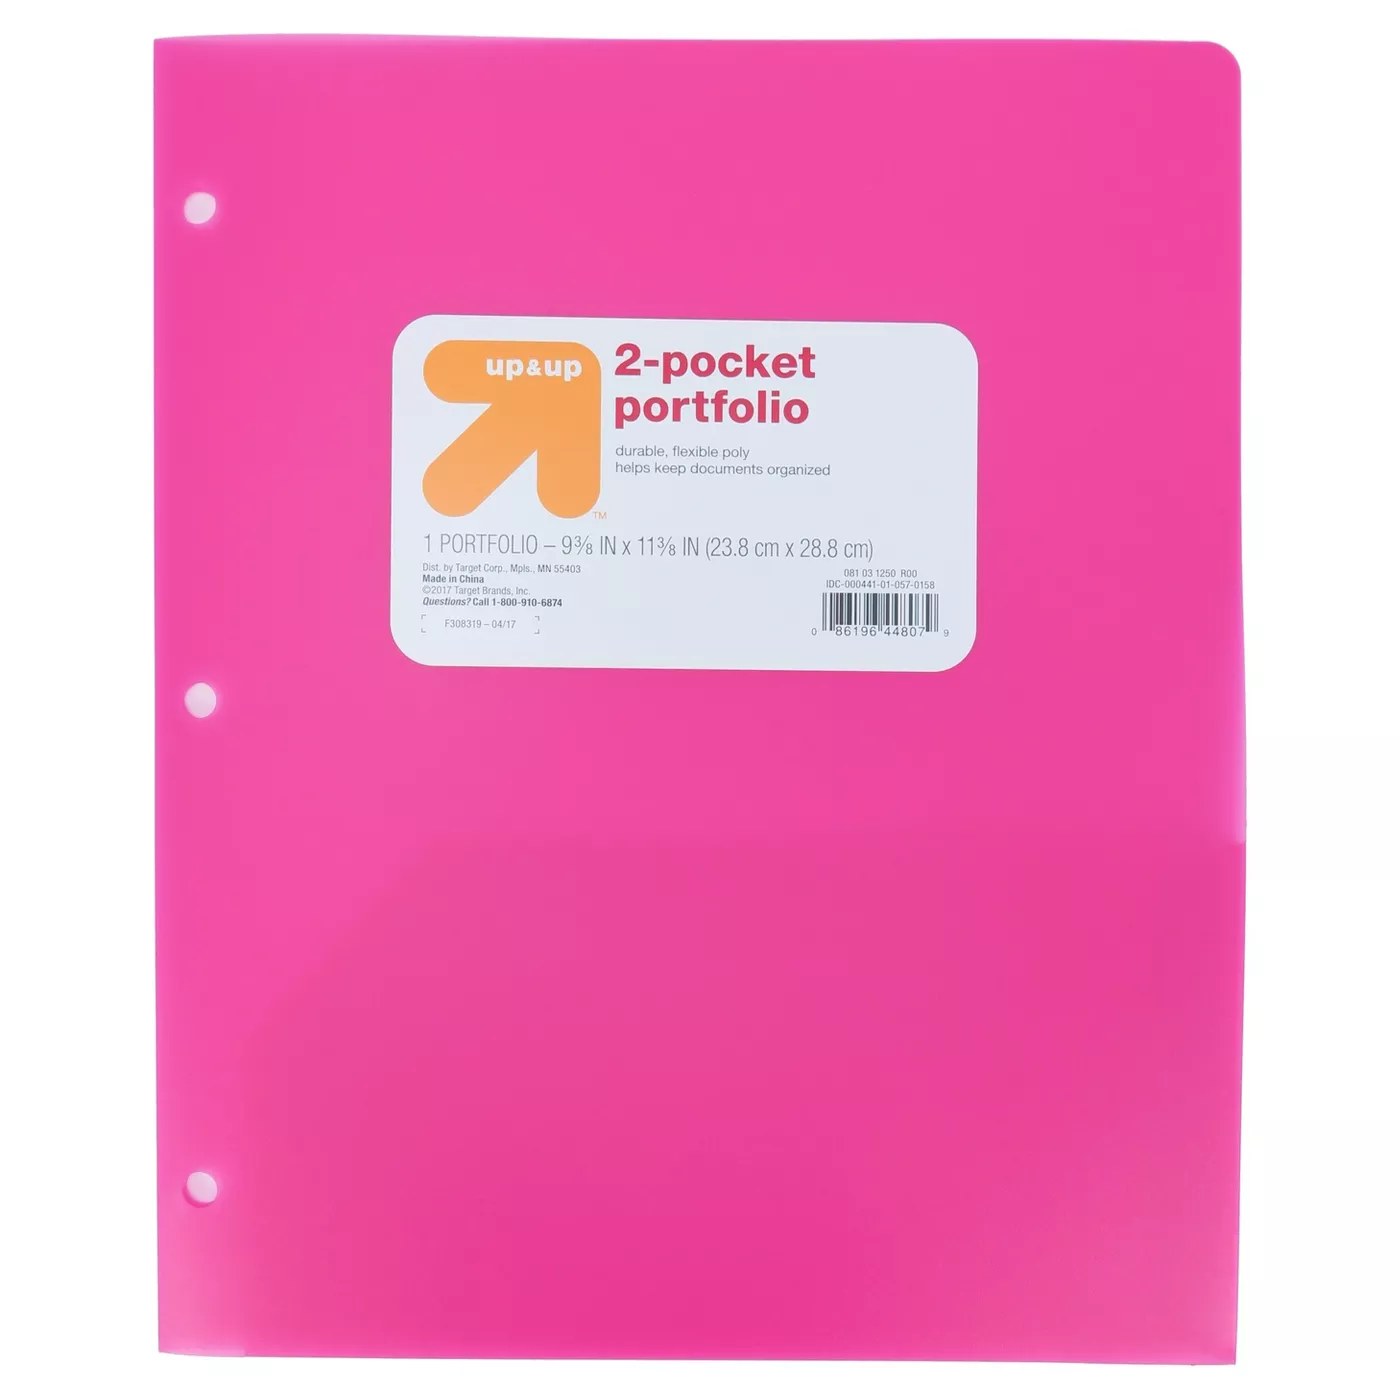 Target Is Selling School Supplies Starting at 25 Cents – SheKnows